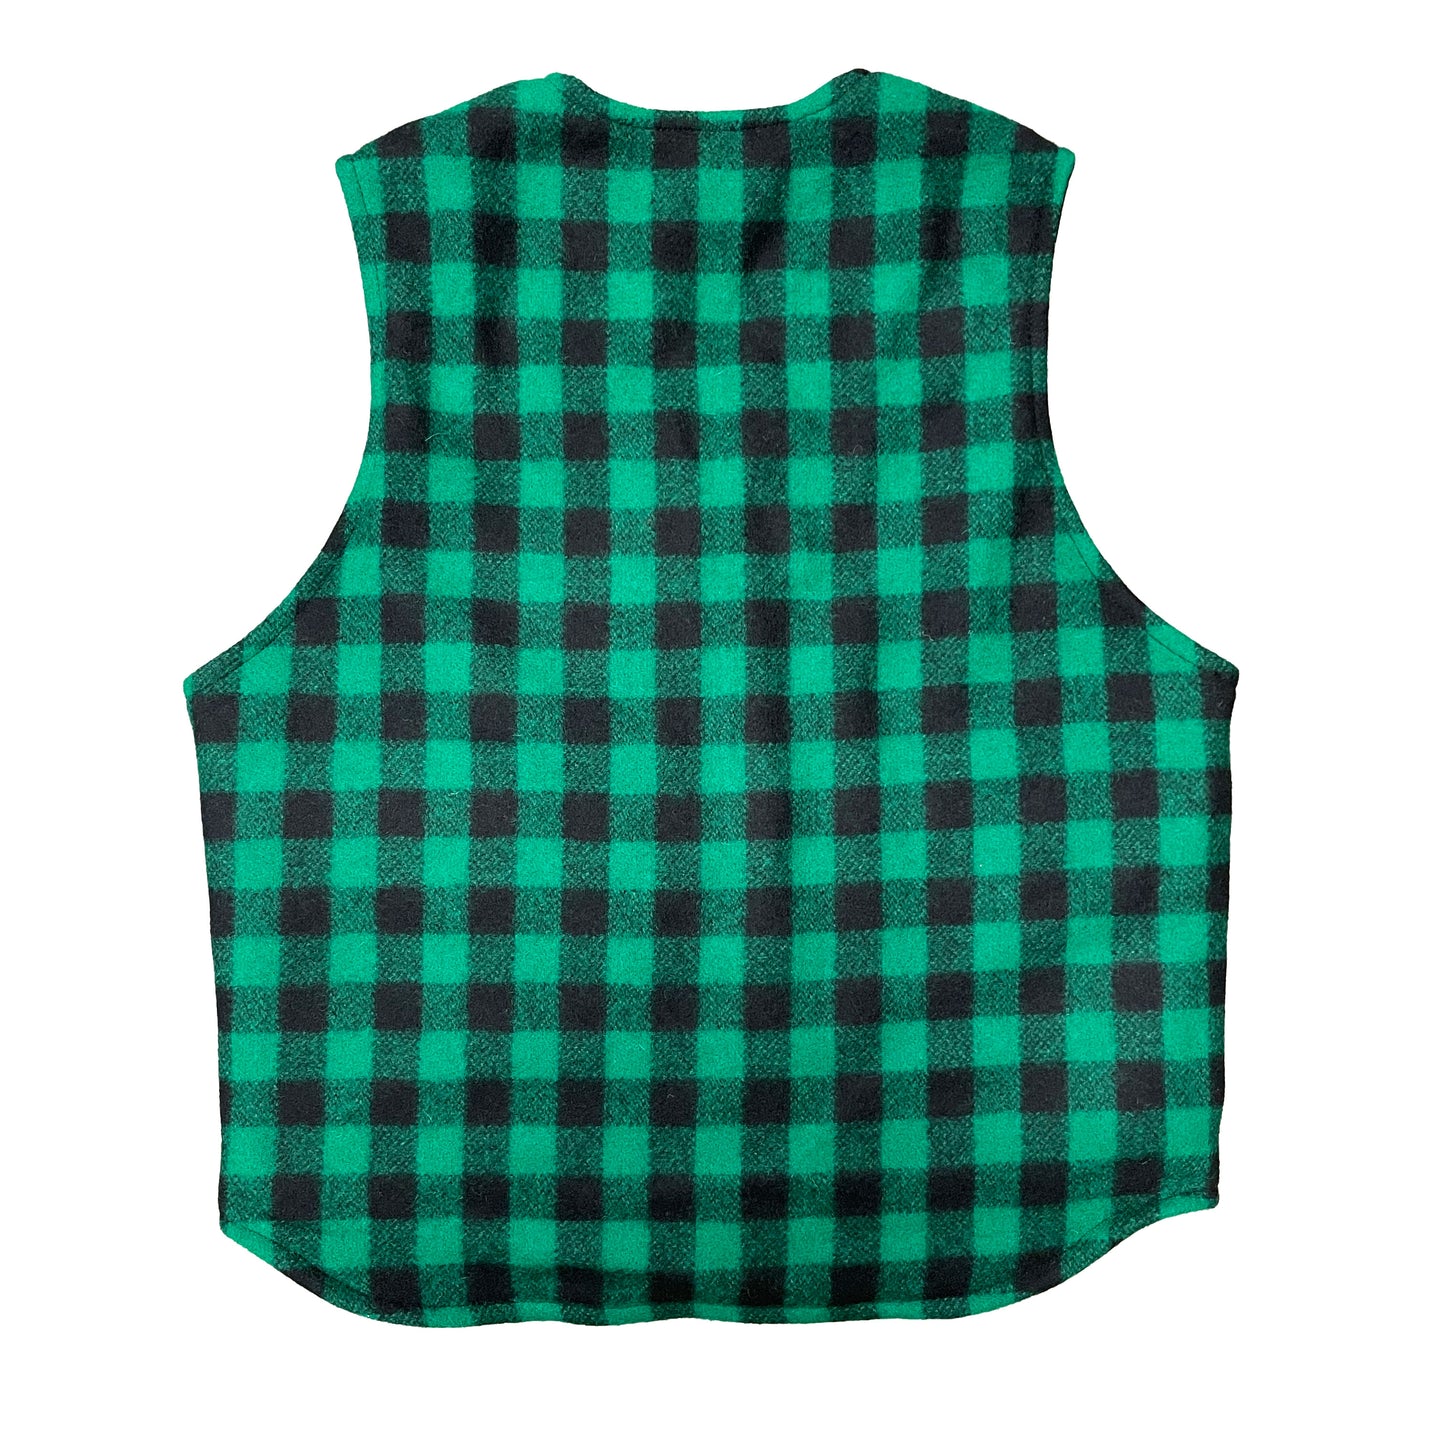 Green and black buffalo check wool vest view of back